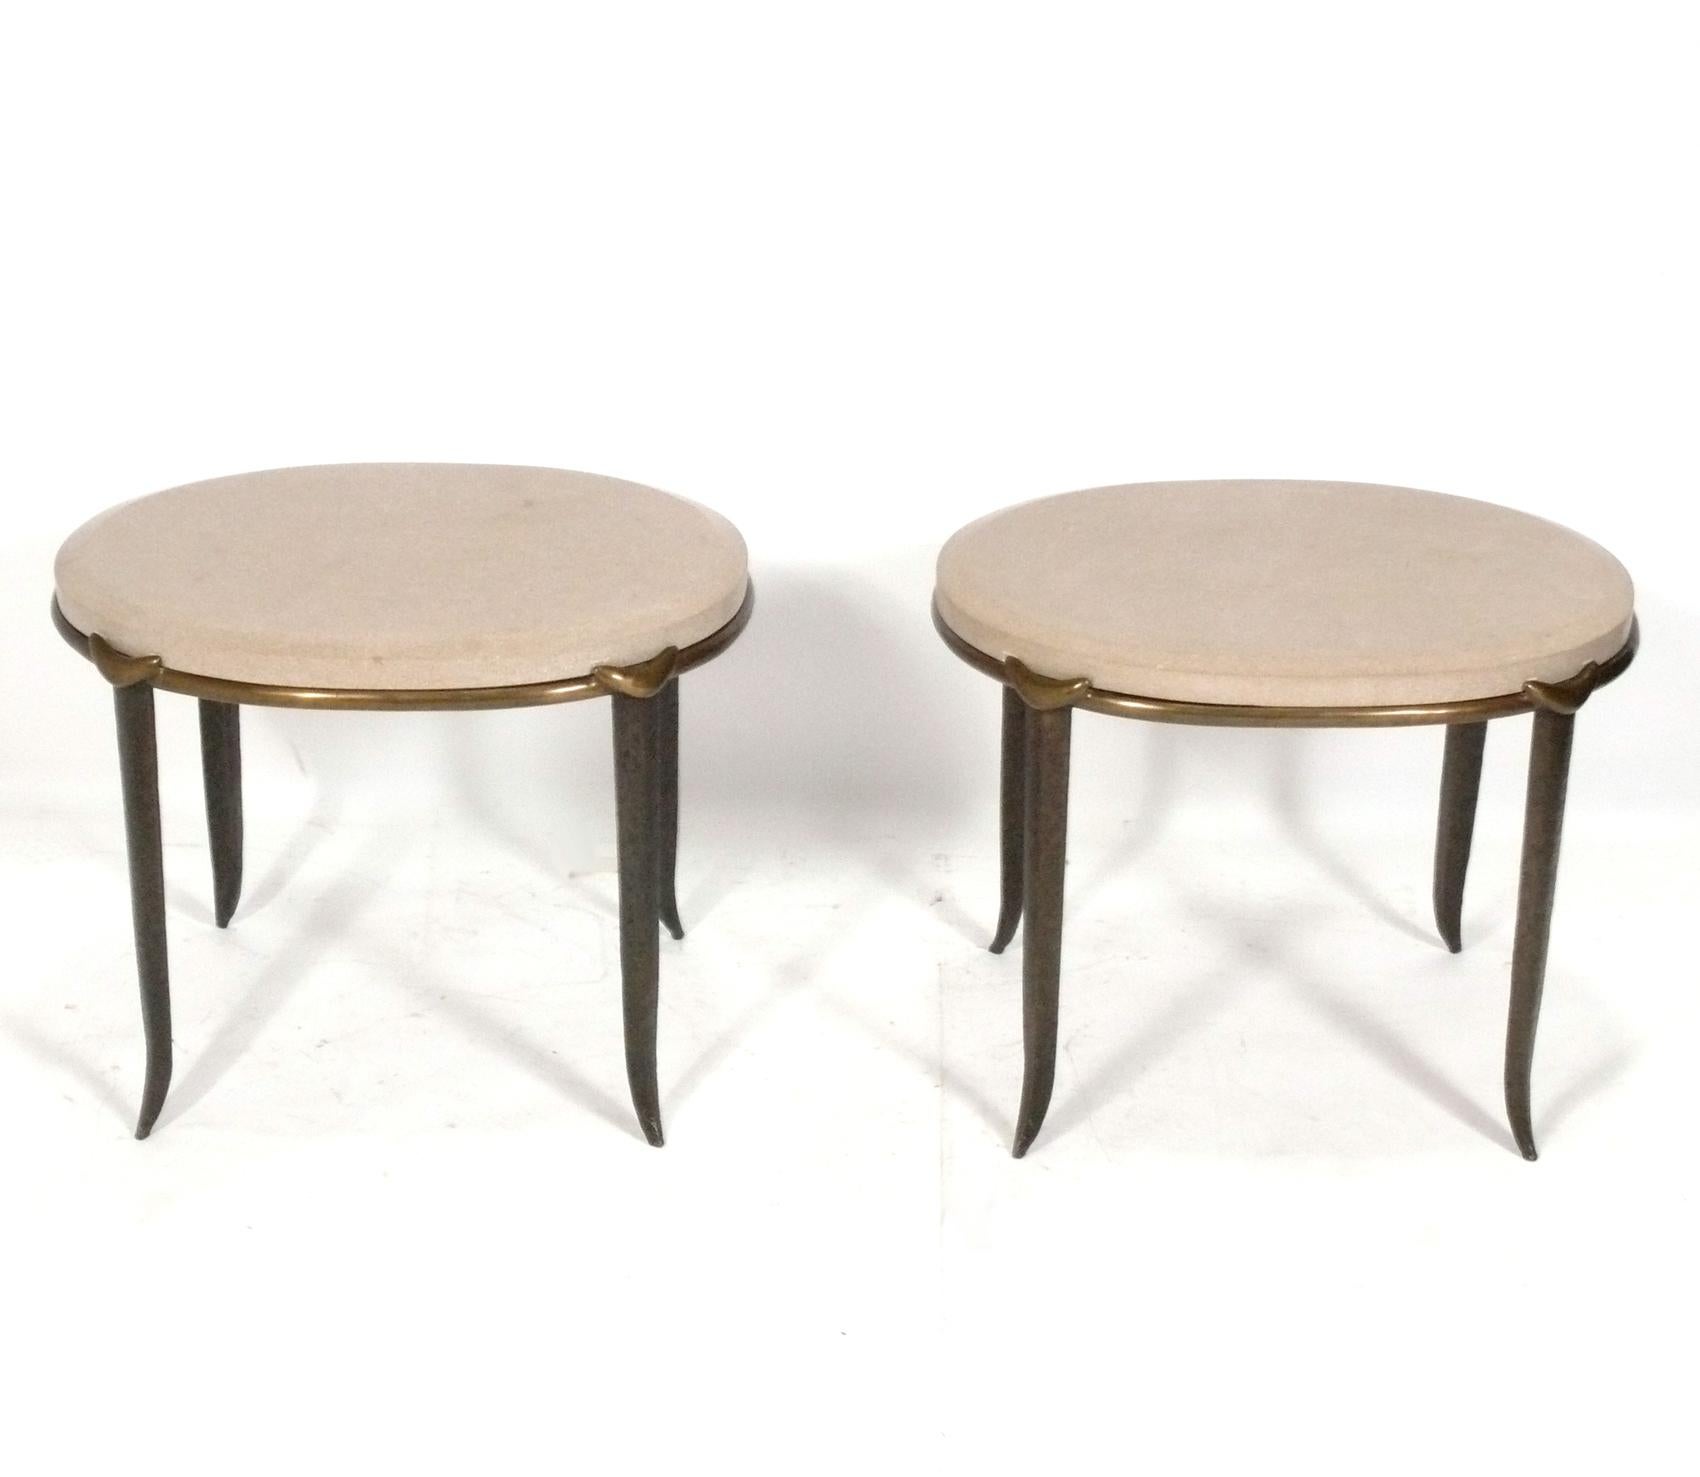 Sculptural solid bronze and marble tables, handmade by Tom Corbin, American, circa 2000s. They are a versatile Size and can be used as end or side tables, or as nightstands. They retain their warm original patina. Corbin's work was clearly